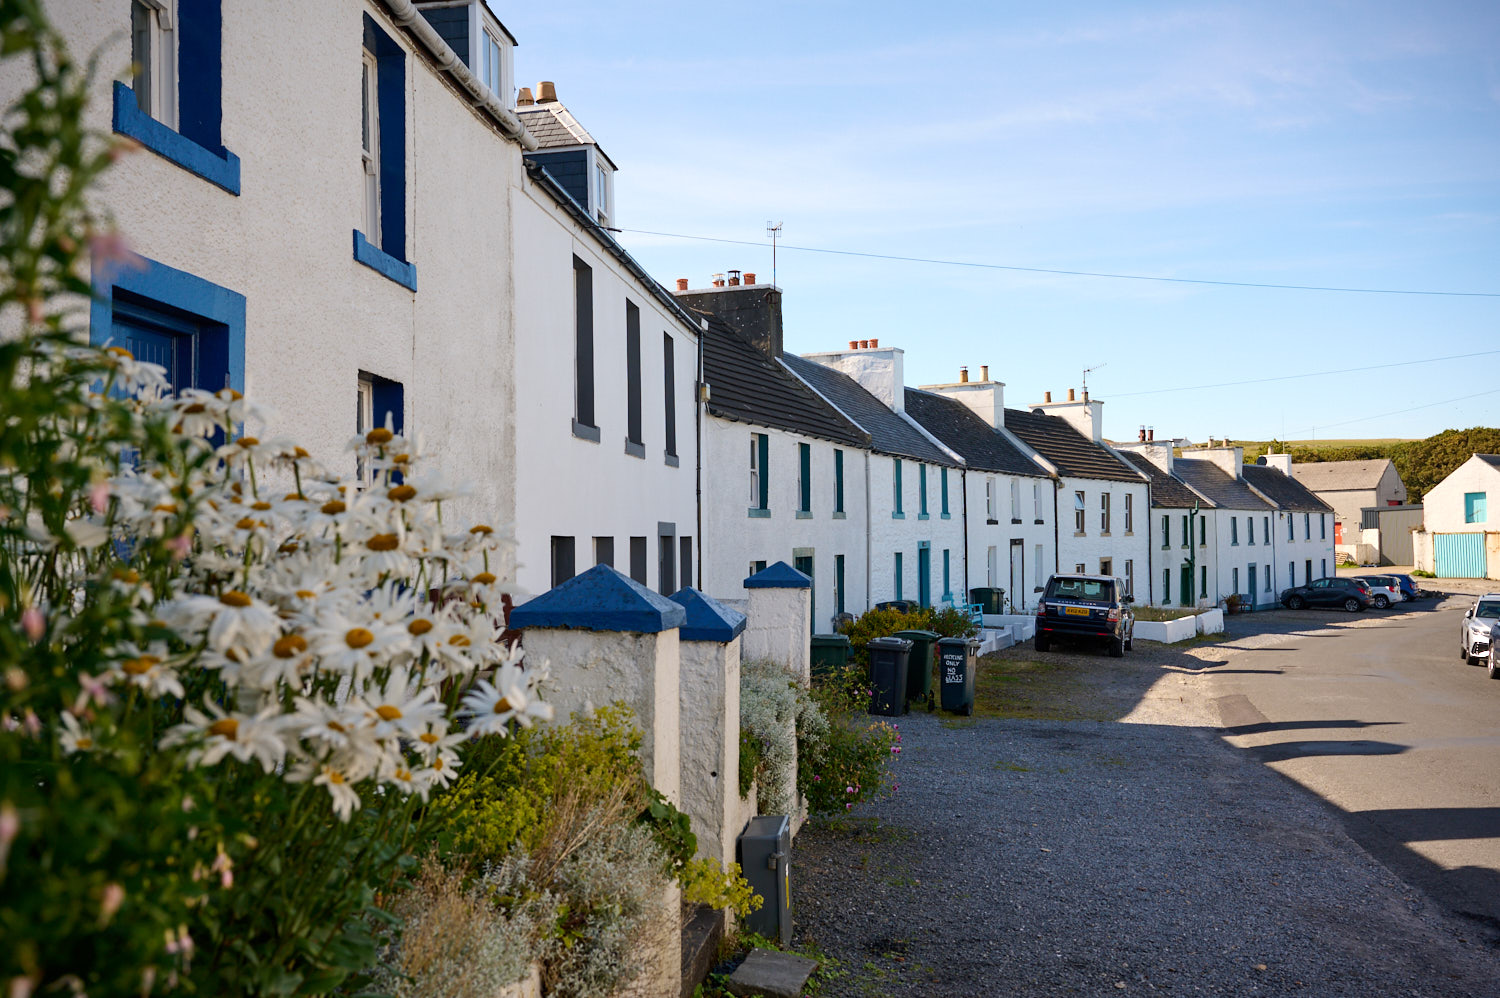 A walk through Port Charlotte in the Isle of Islay, Inner Hebrides